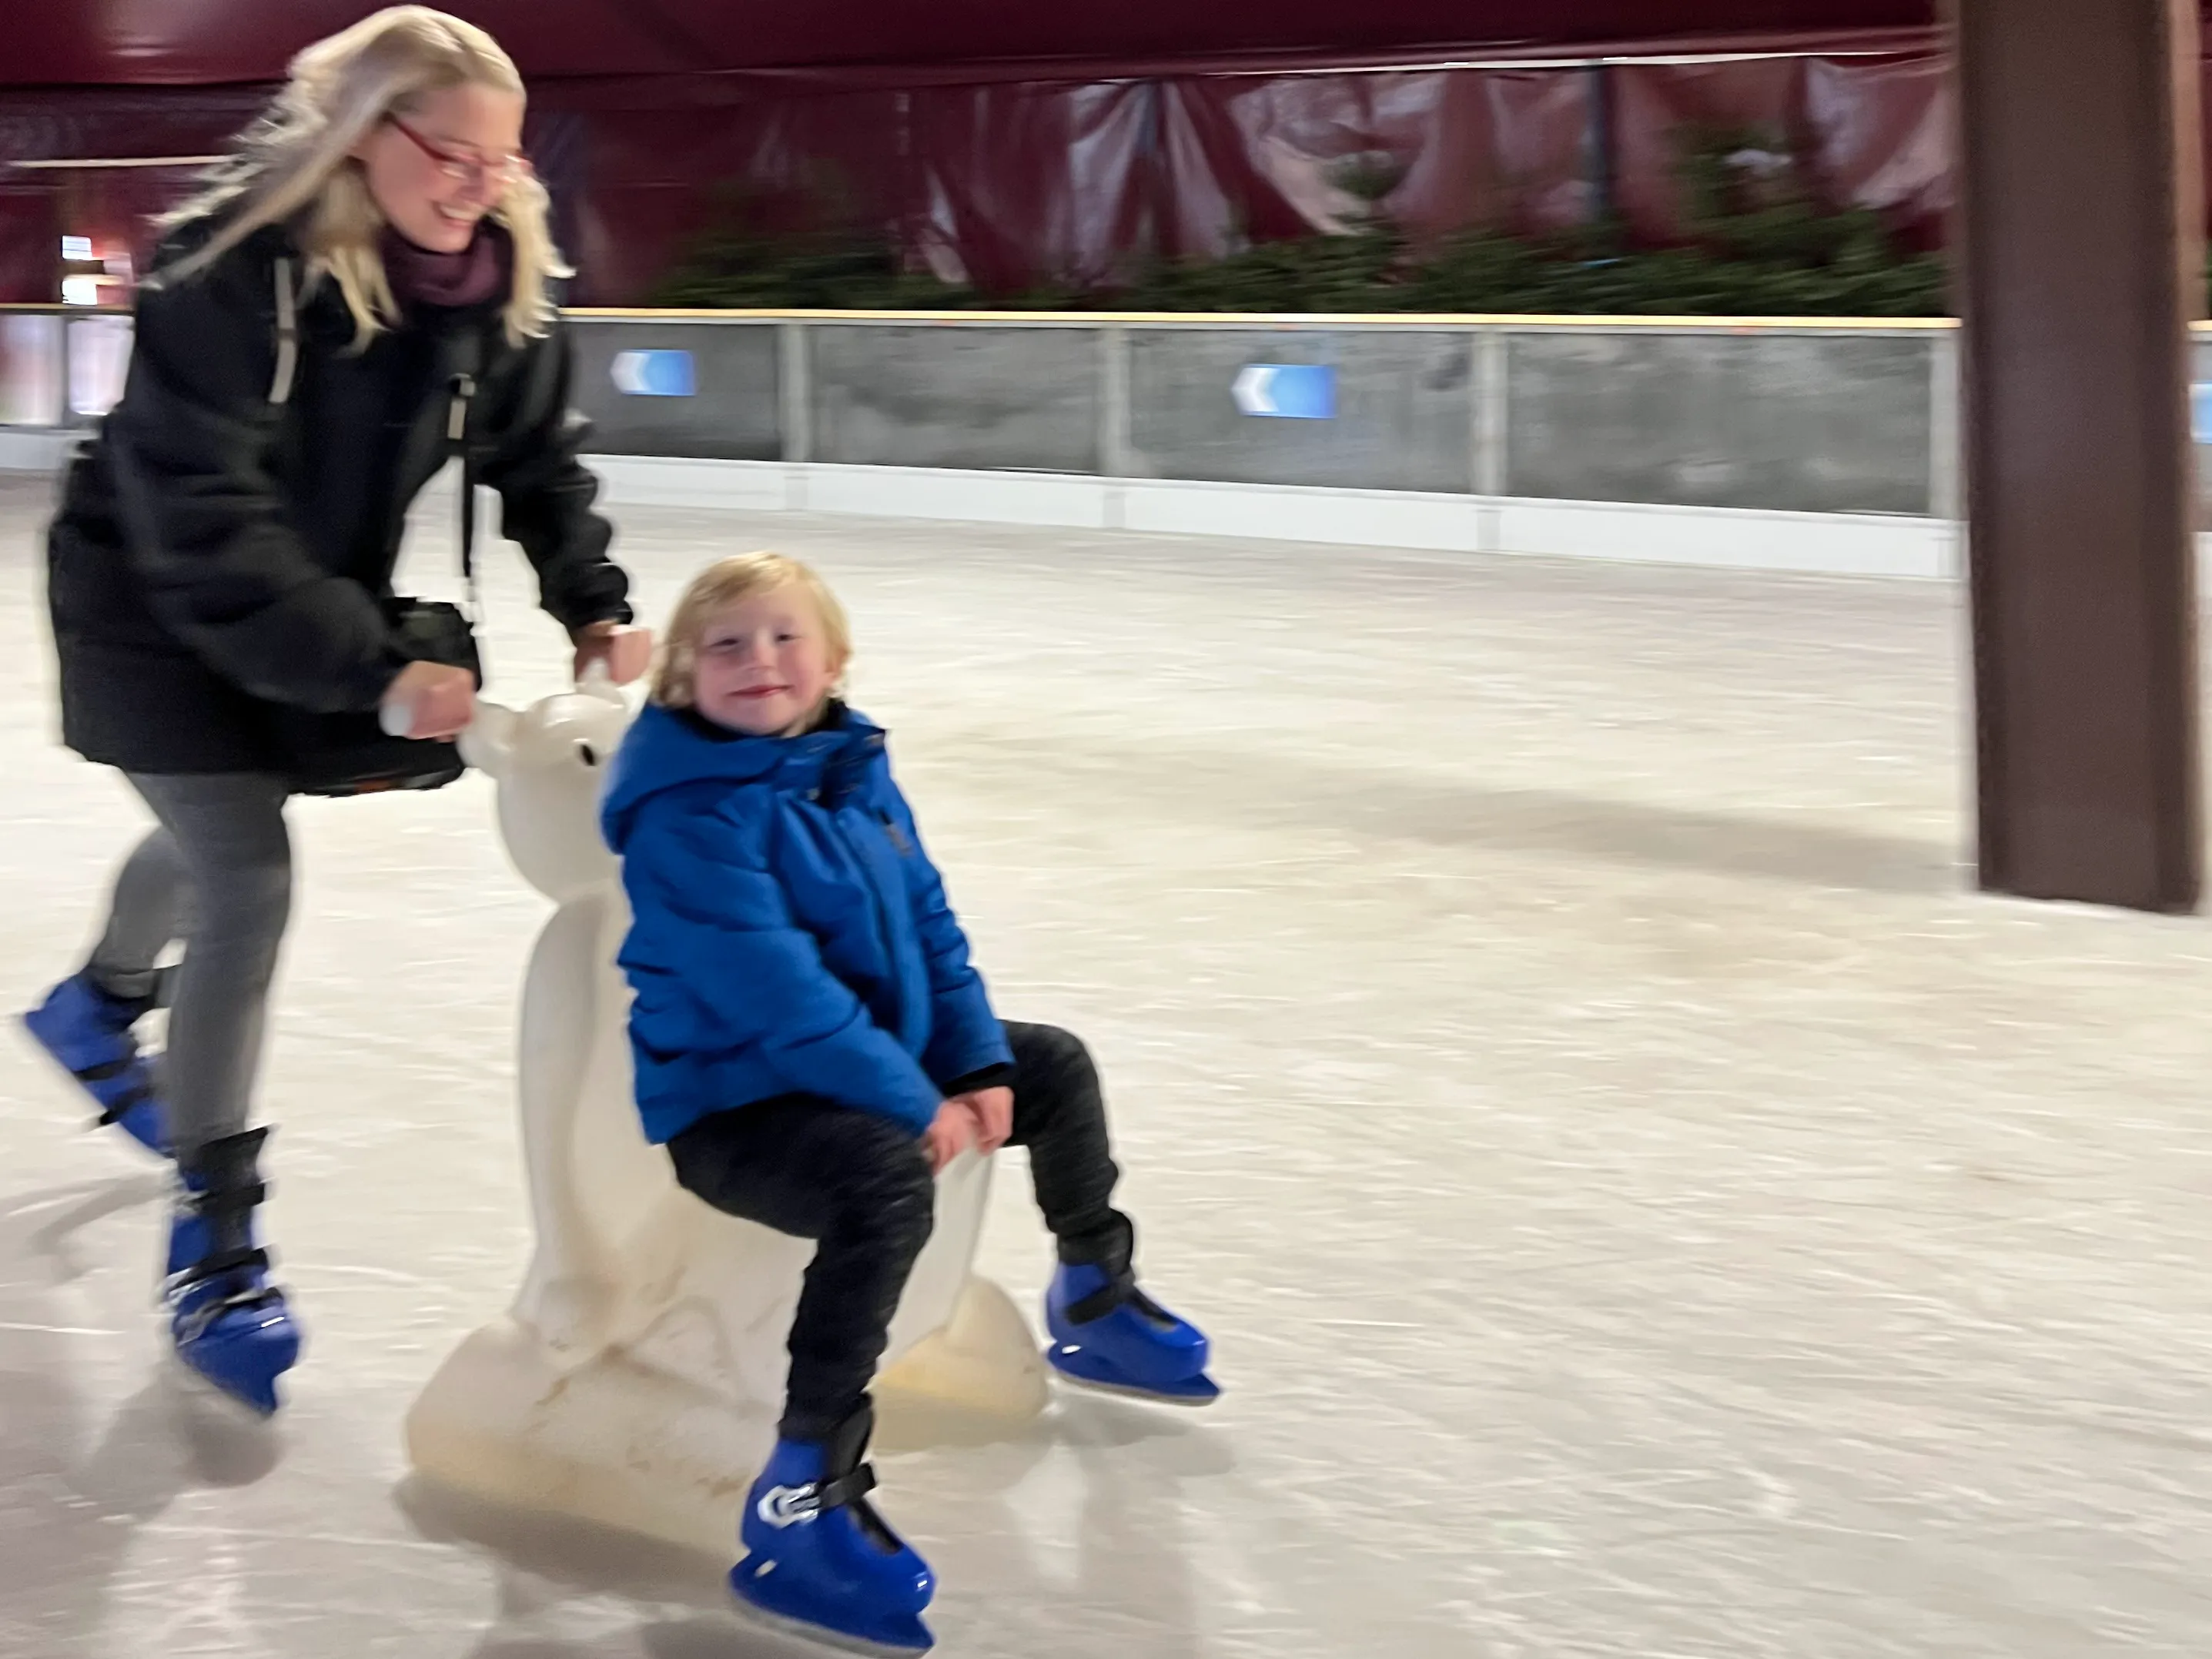 An adult pushing a child around a seasonal ice rink on a skate aid